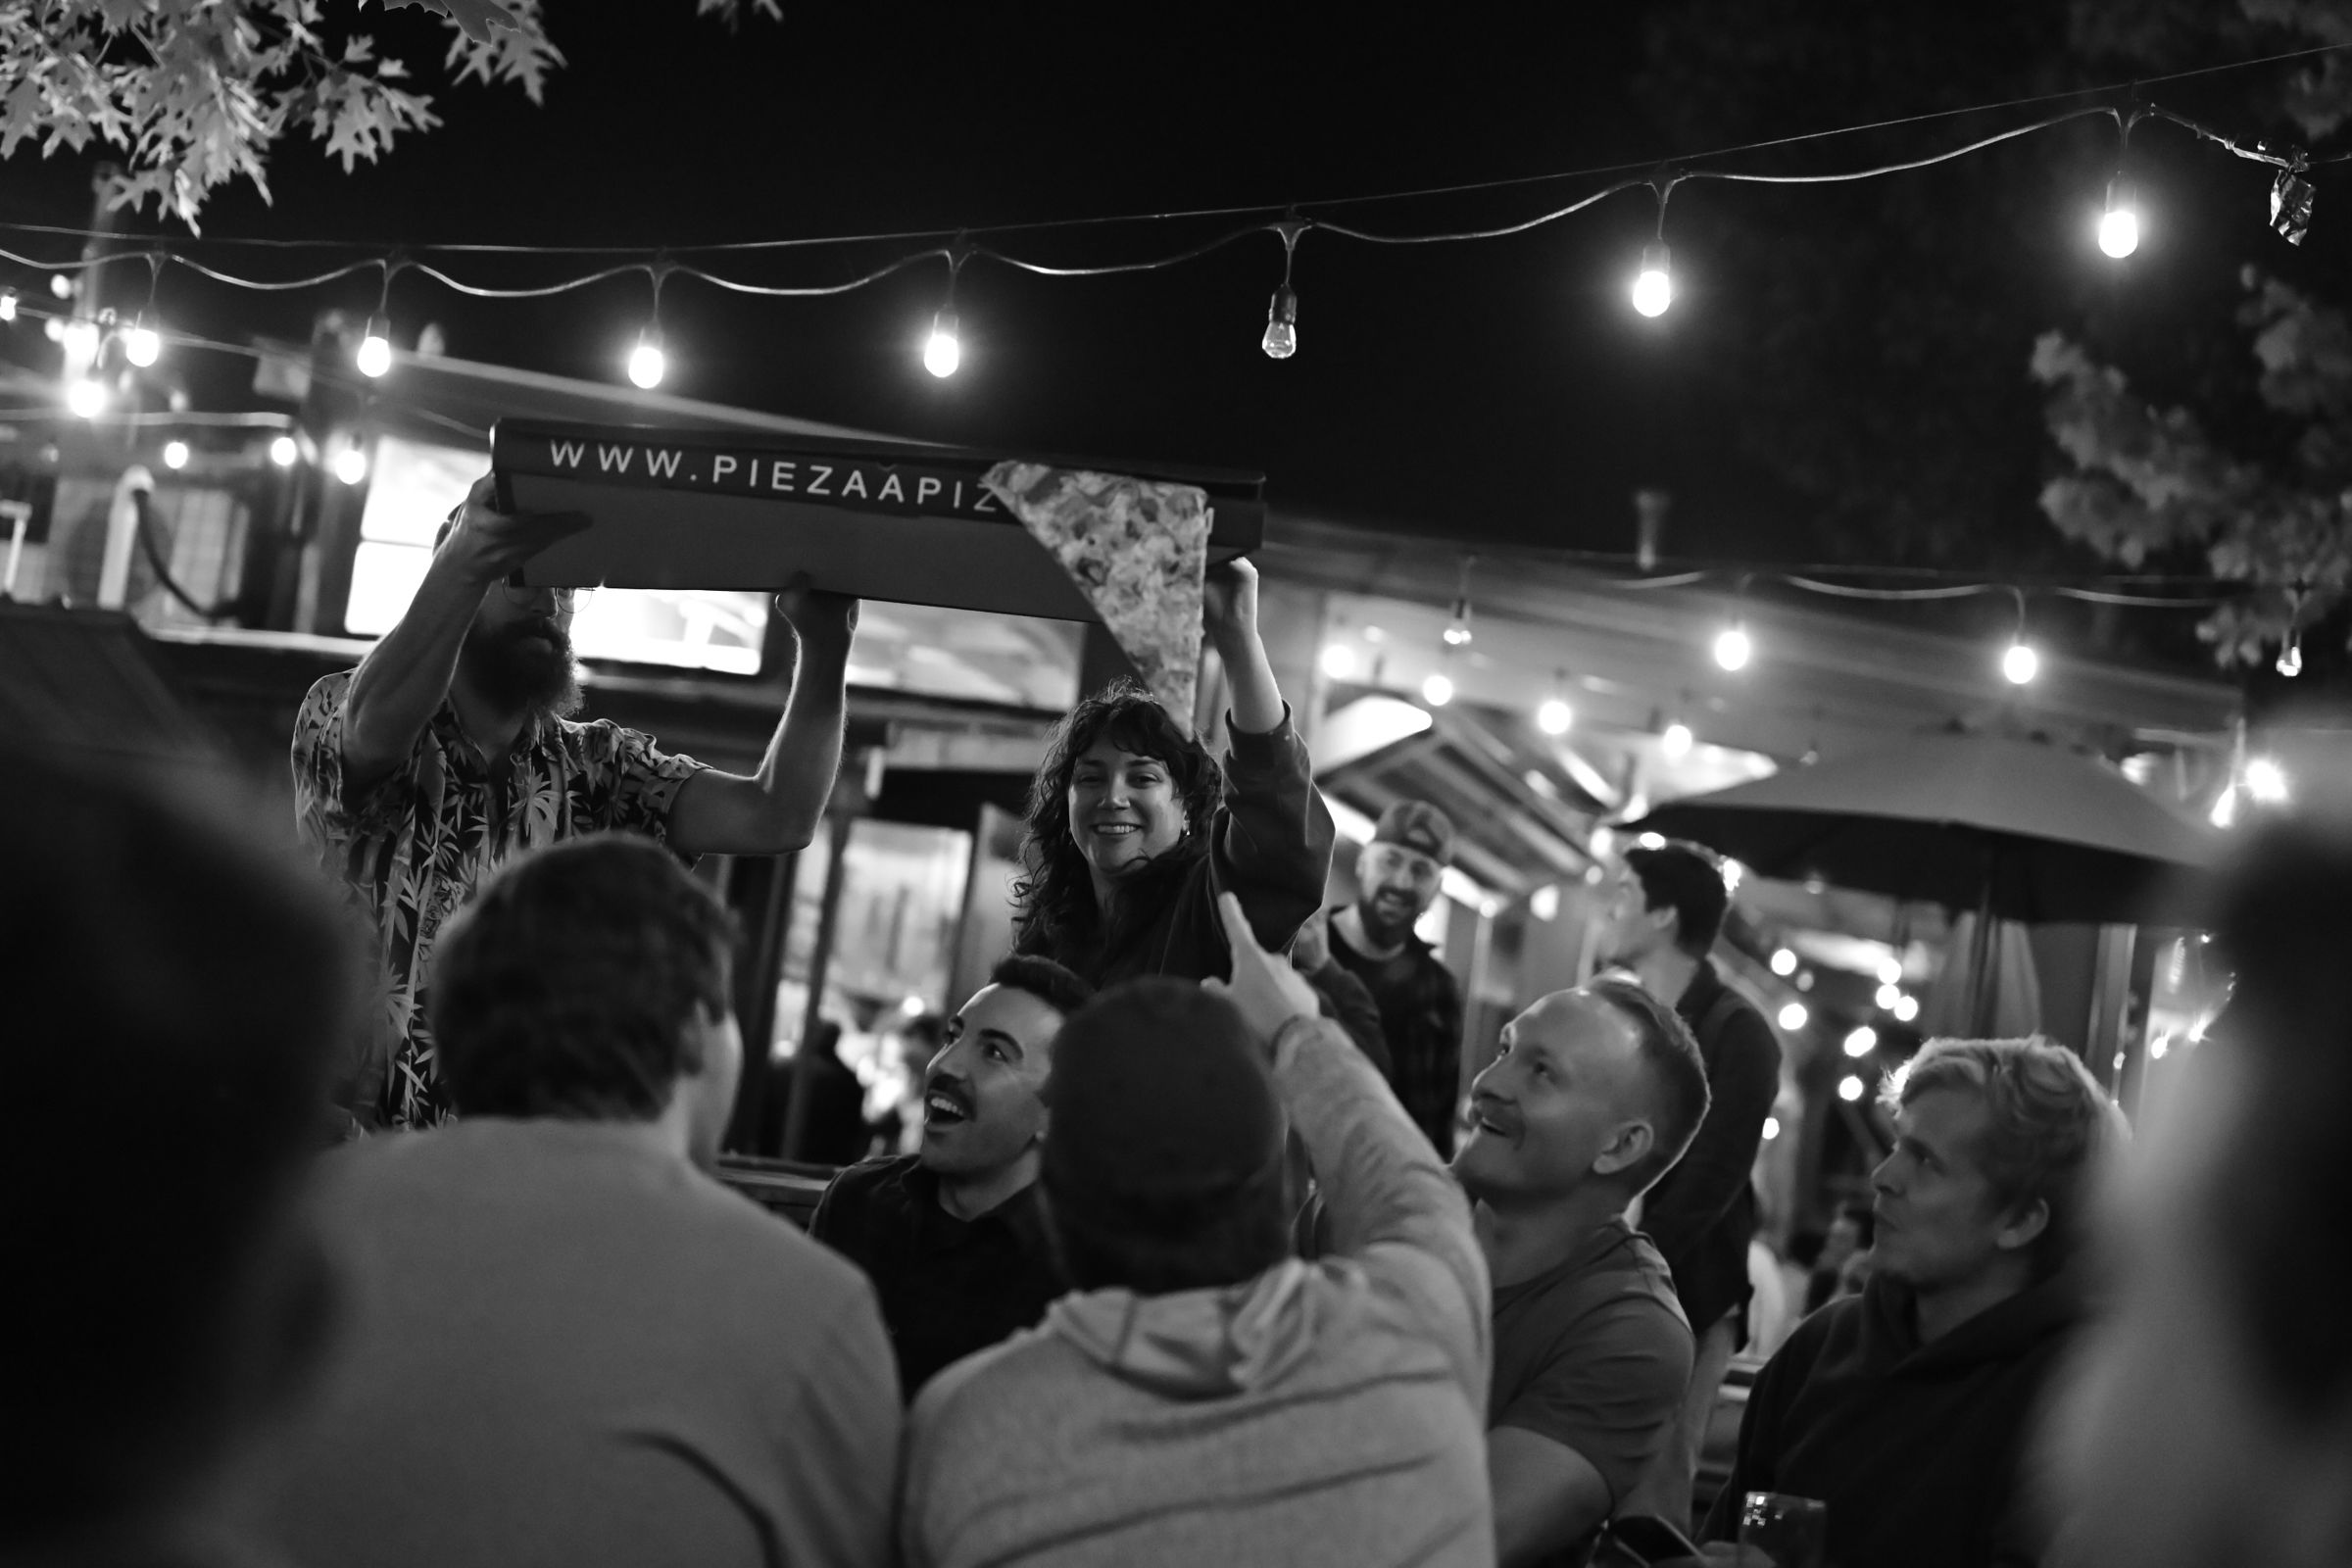 A black and white photo captures a lively scene at an outdoor gathering under string lights. A person in the center is holding up a large pizza box from “Piezaa Pizza” with a slice of pizza in hand, while others around them look up, smiling and pointing at the pizza. The ambiance suggests a casual, festive atmosphere with people enjoying food and company.